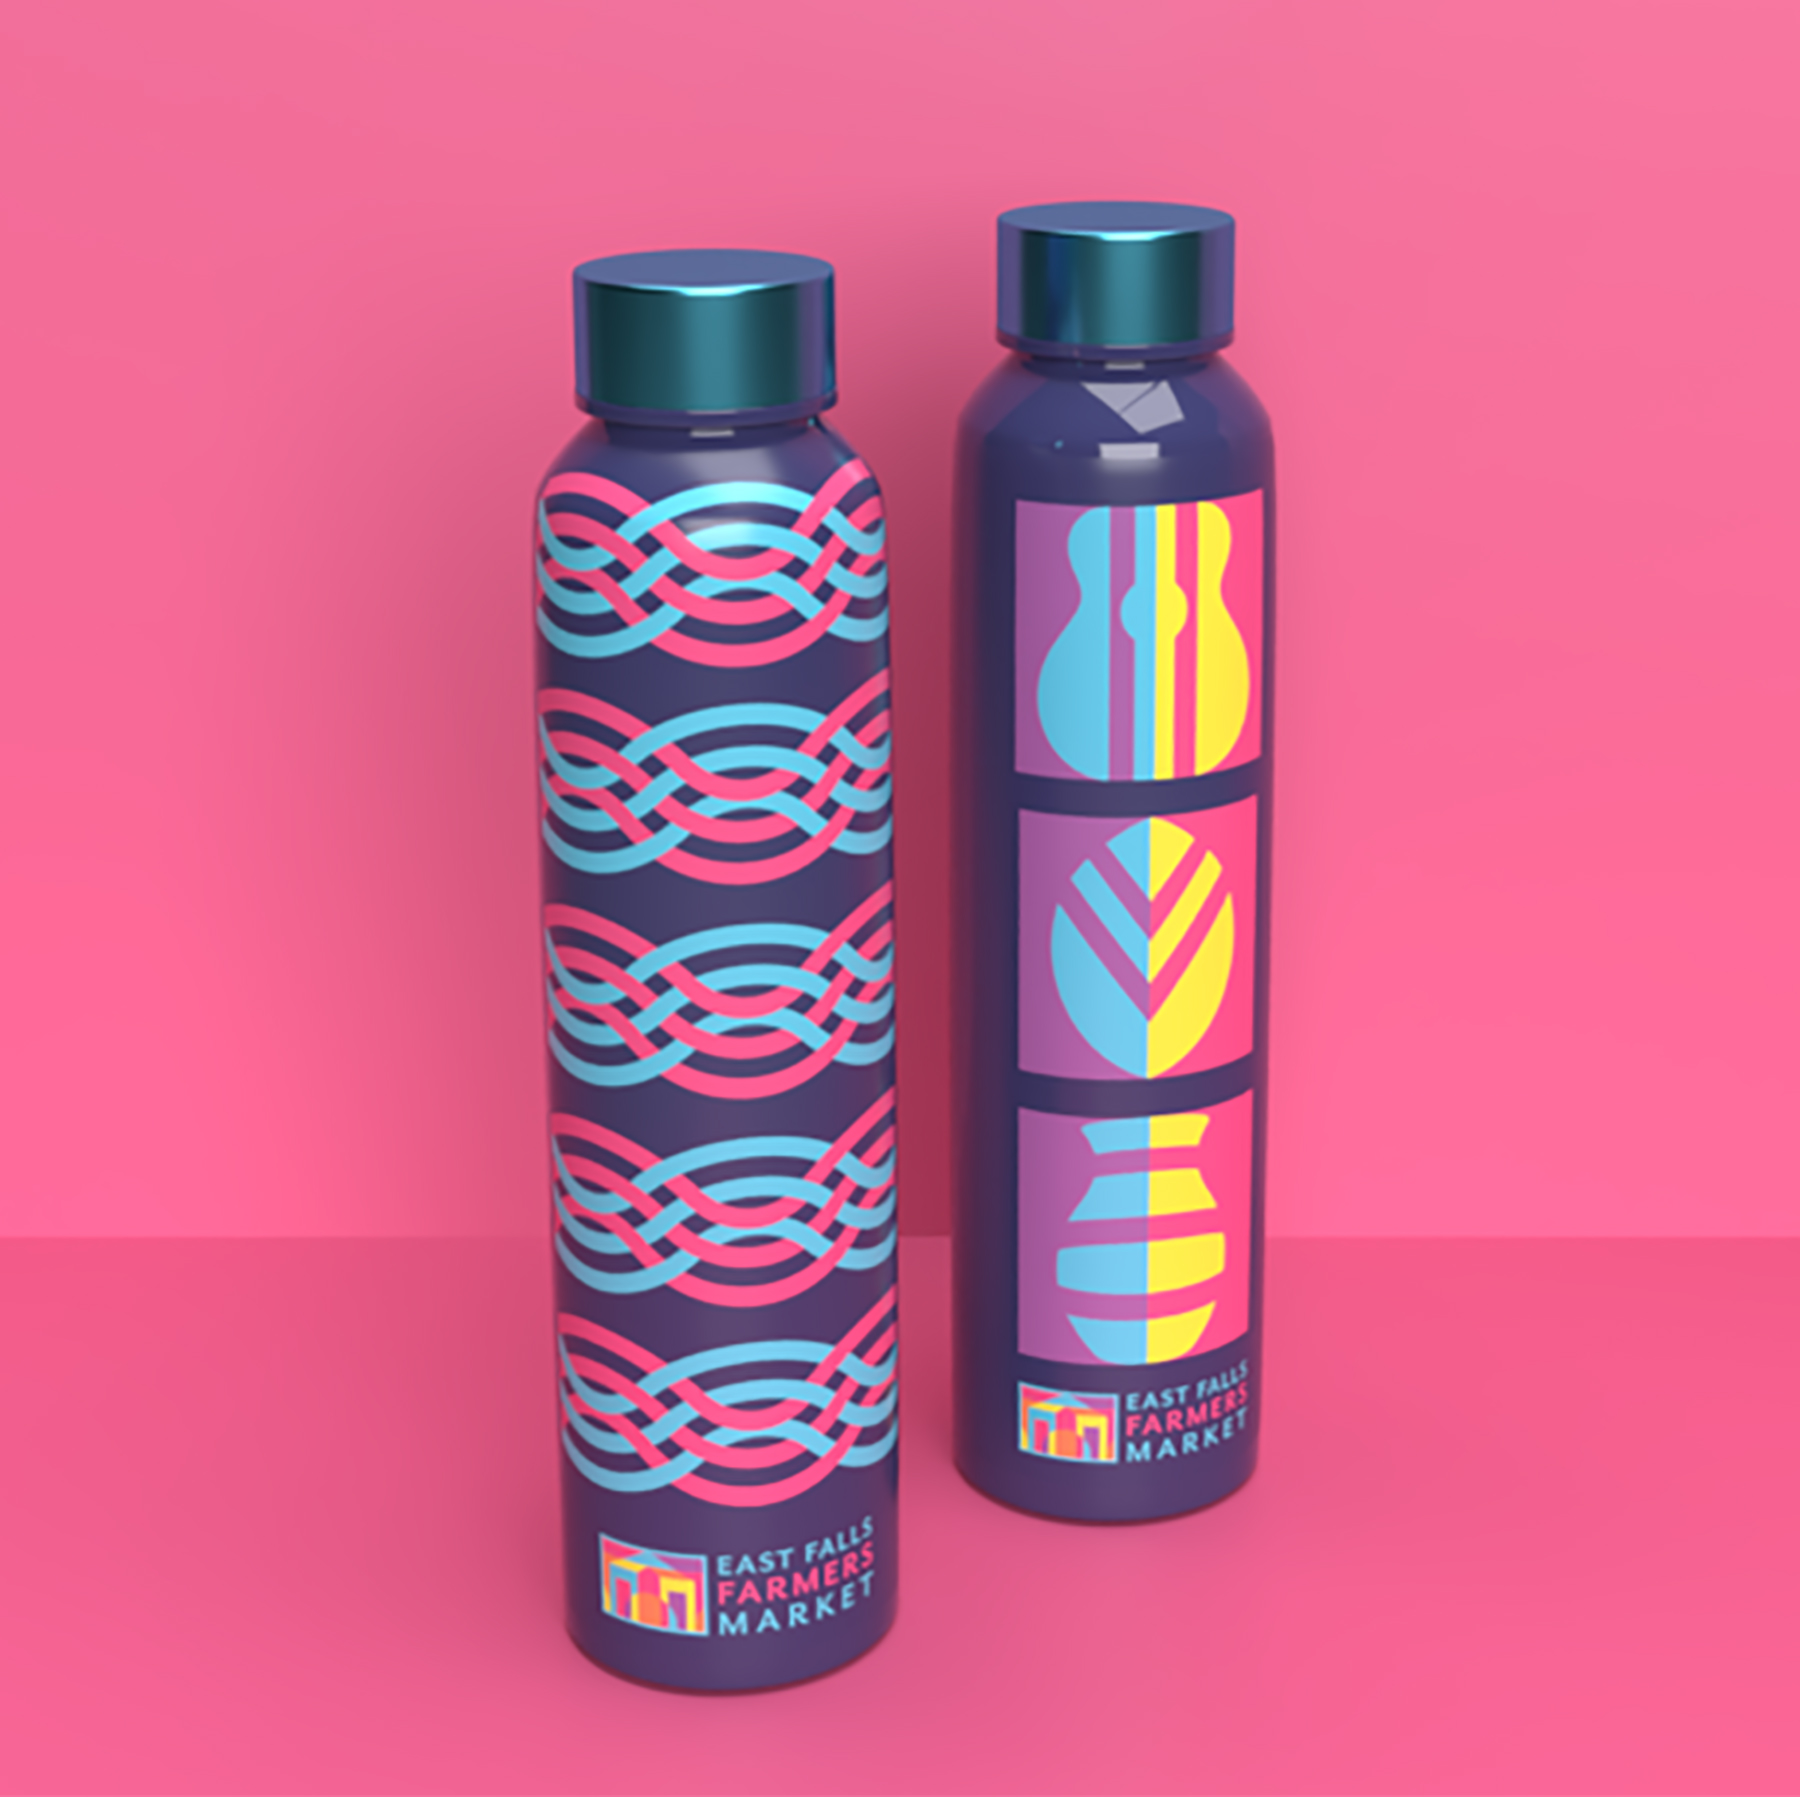 Two reusable bottles, one with a blue and pink wave pattern and the other with three icons of a guitar, leaf, and vase.